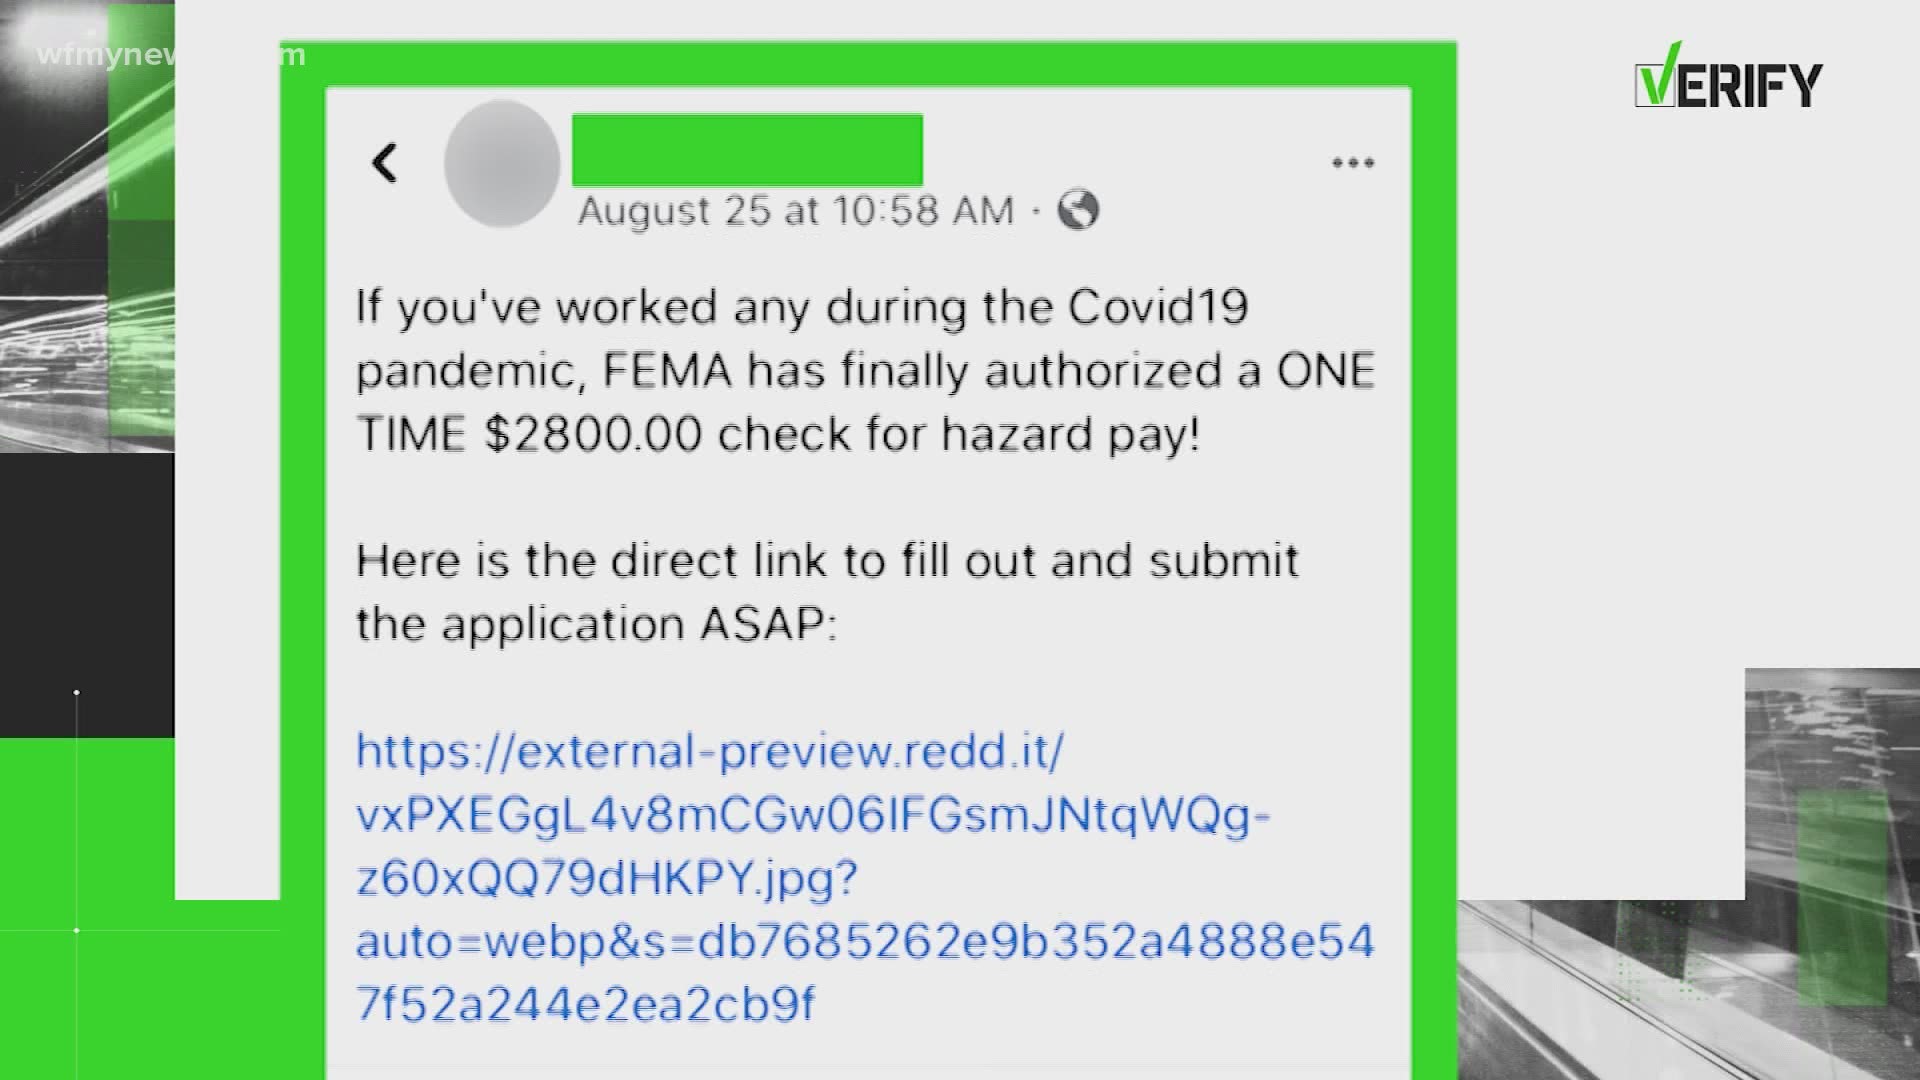 Our VERIFY Team dug into the question and found out FEMA isn't mailing out hazard paychecks if you worked during the pandemic.